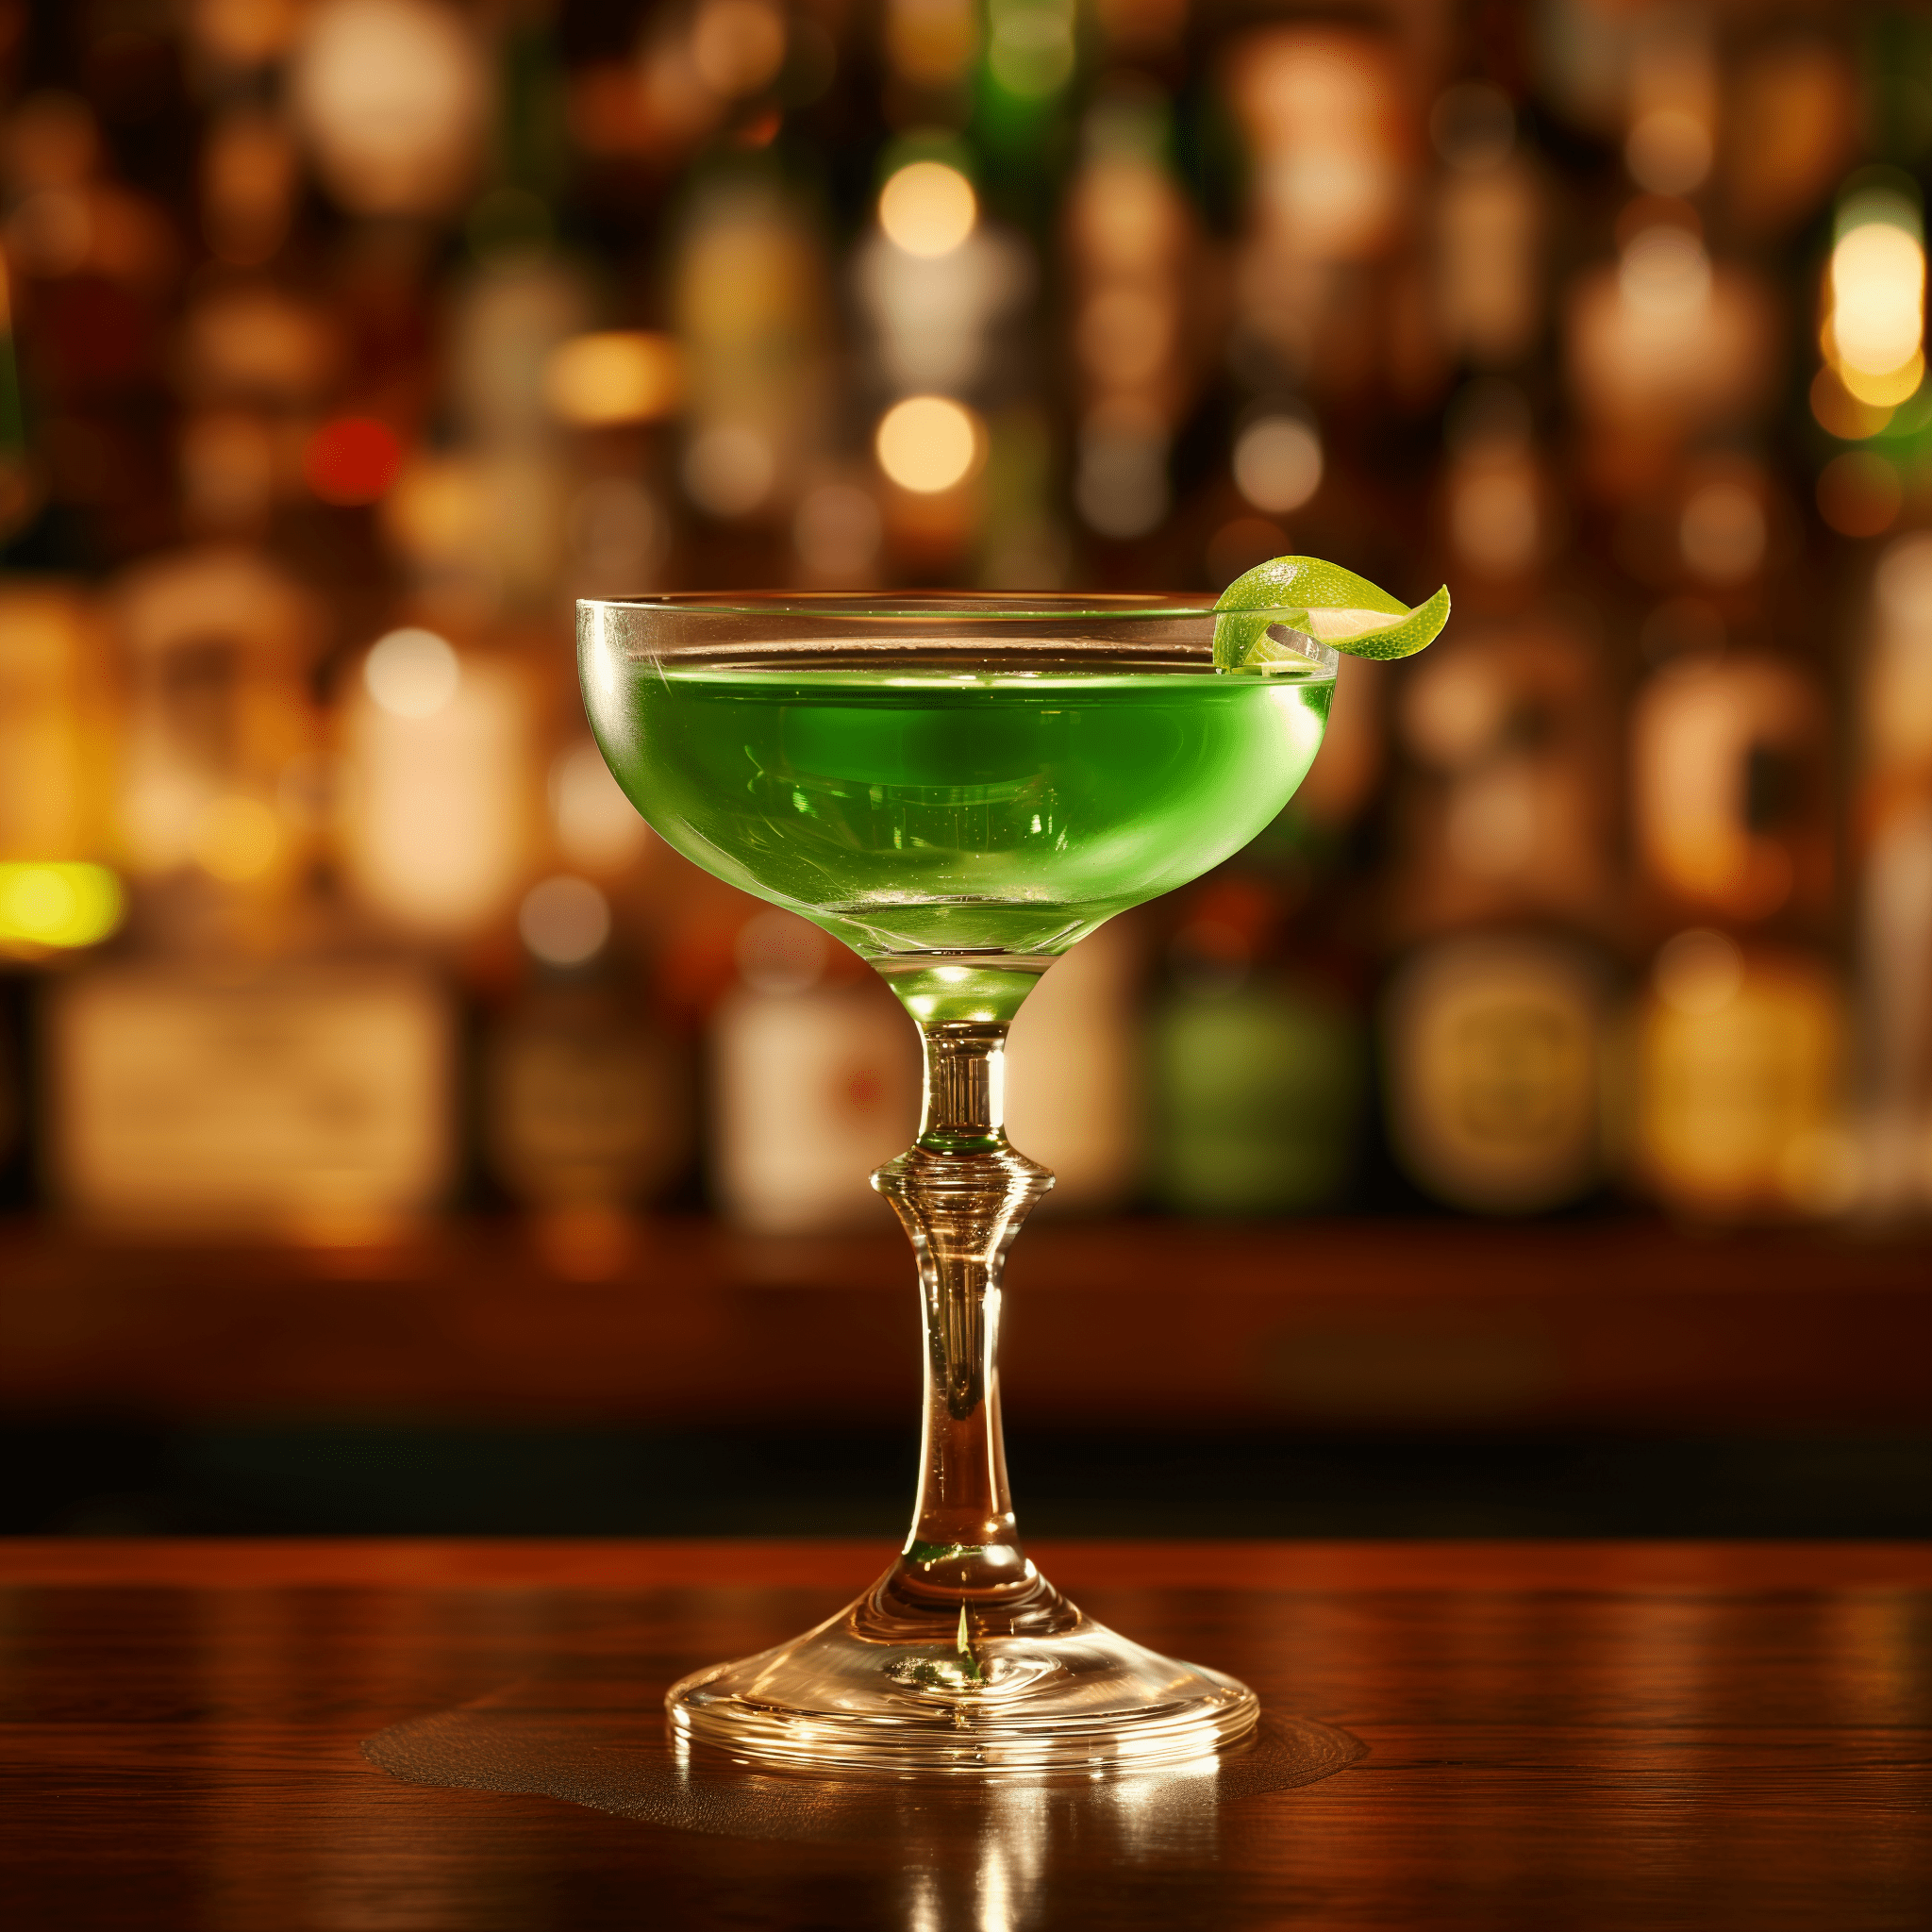 Green Glazier Cocktail Recipe - The Green Glazier offers a symphony of flavors. It's a robust and spirit-forward cocktail with a velvety texture. The cognac provides a warm, rich base, complemented by the aromatic herbal liqueur. The white creme de cacao adds a subtle sweetness and chocolatey undertone, while the bitters bring a complex, spicy edge that balances the drink.